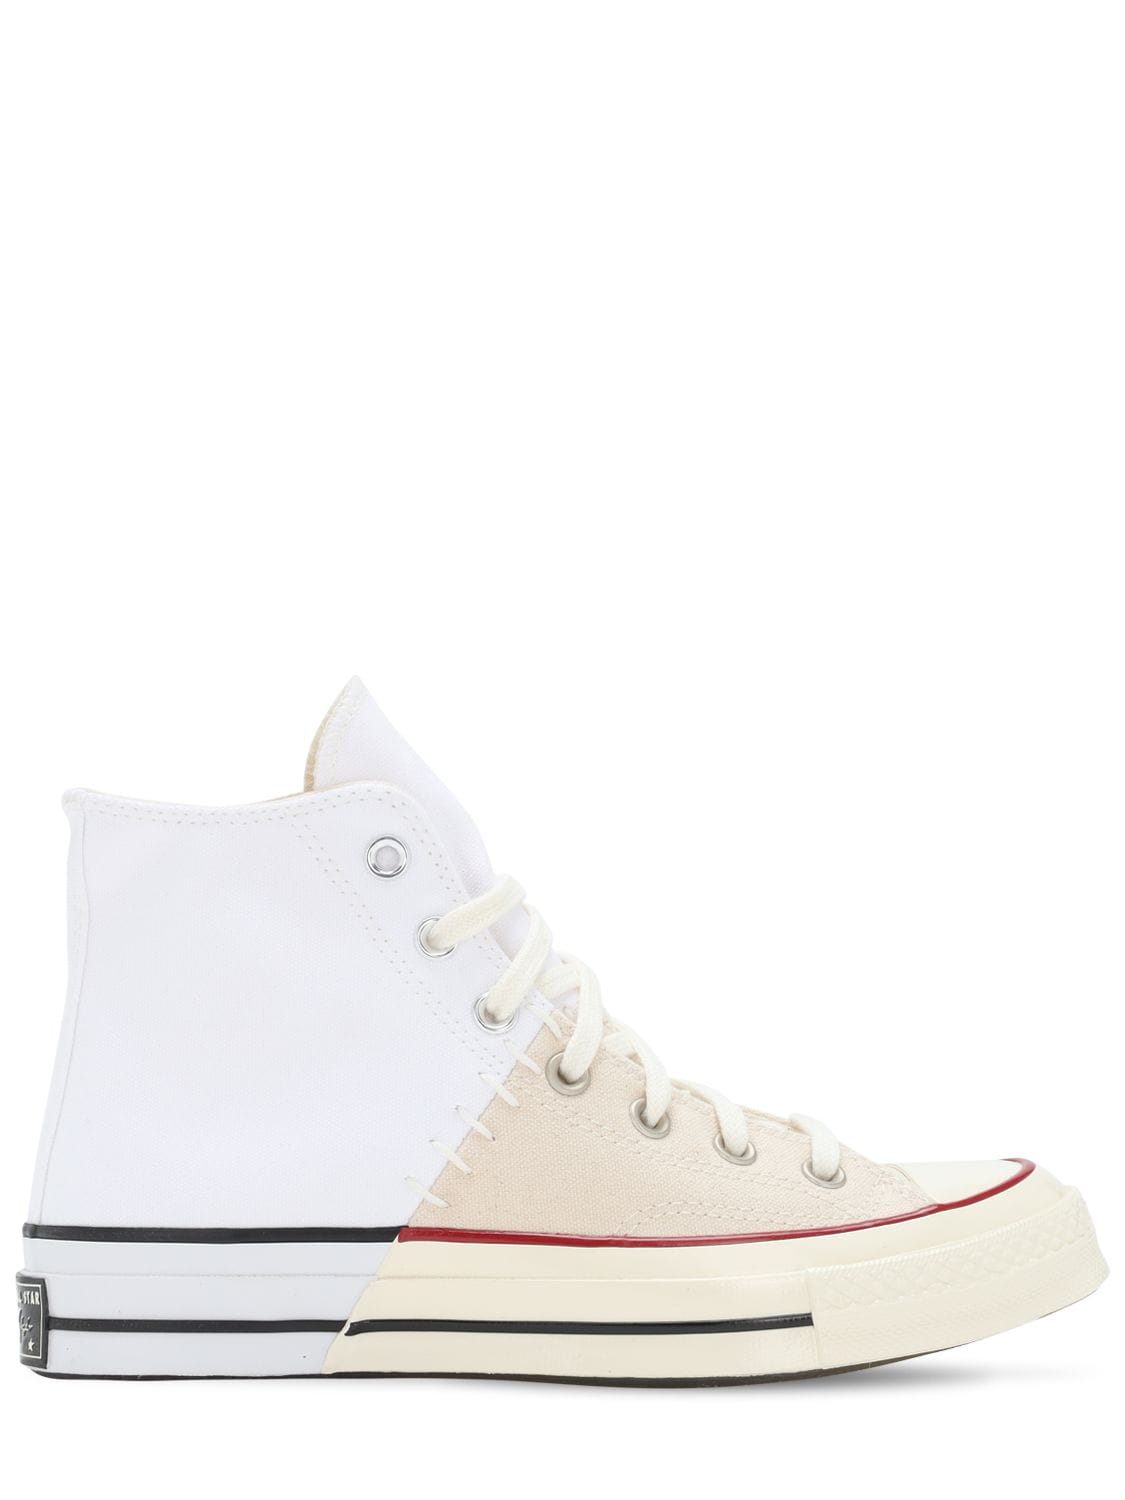 Image of Chuck 70 Reconstructed High Top Sneakers